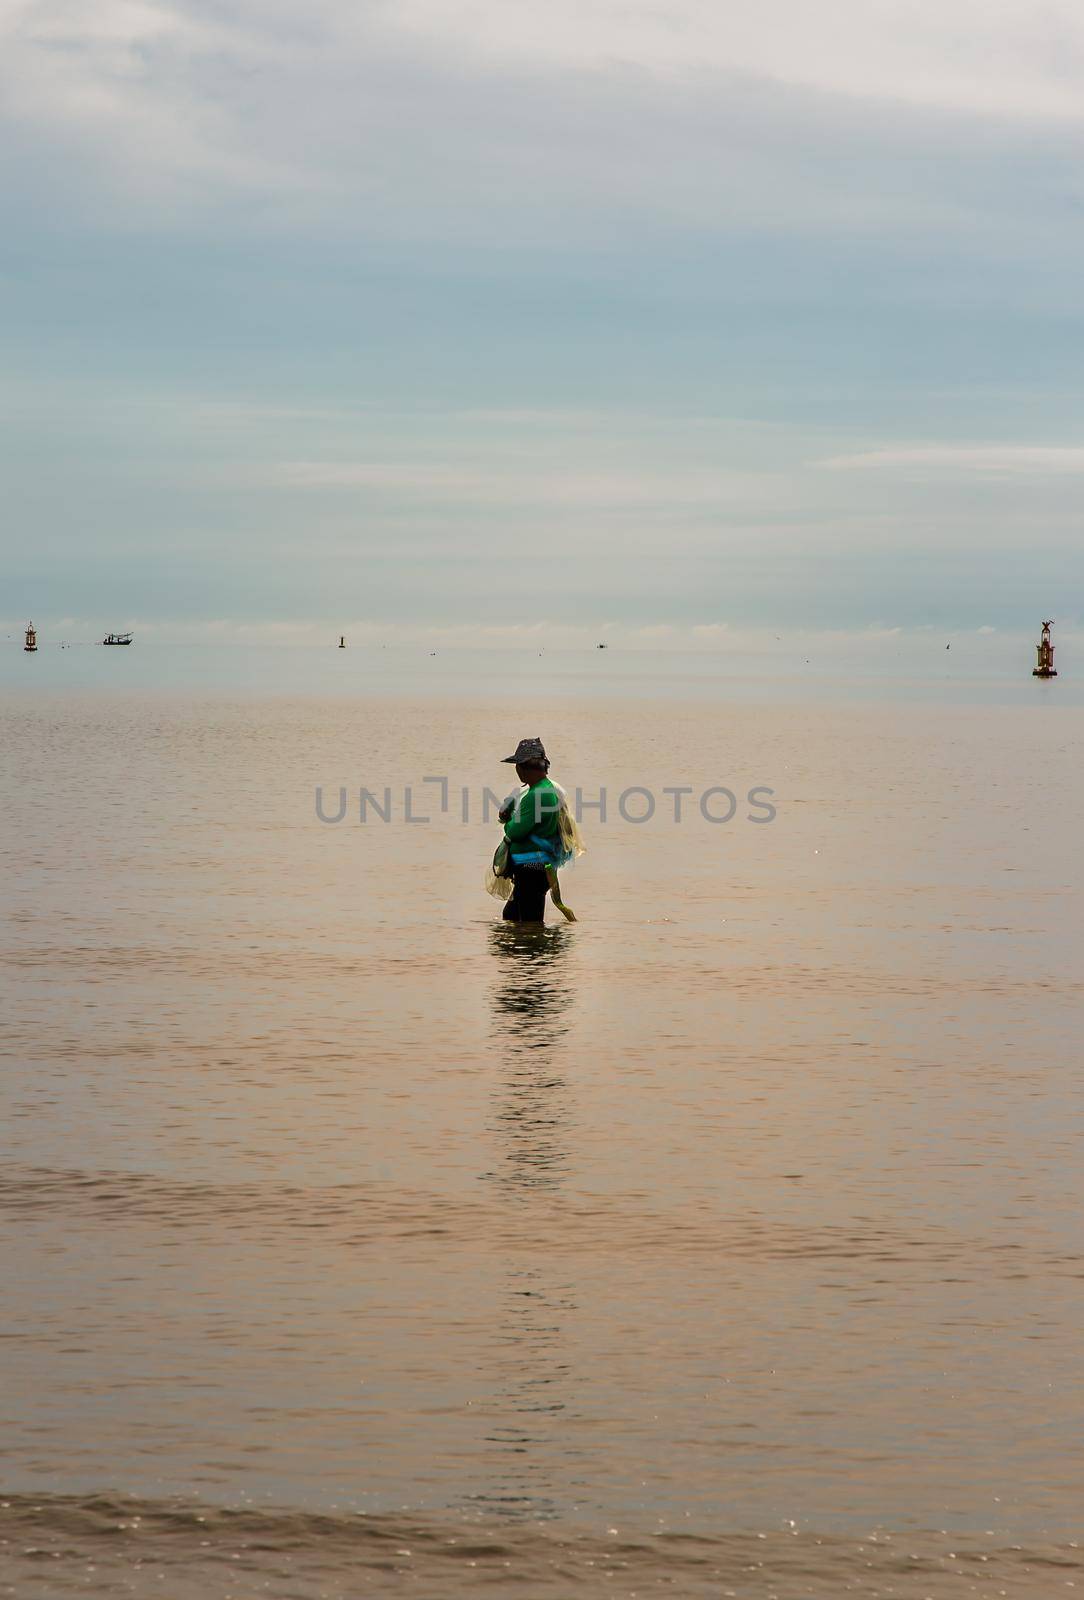 Phetchaburi, Thailand - Sep 19, 2021 : An unidentified local fisherman with his fishnet stands in the sea to catch some fish. Fisherman ready to cast fish net, No focus, specifically.